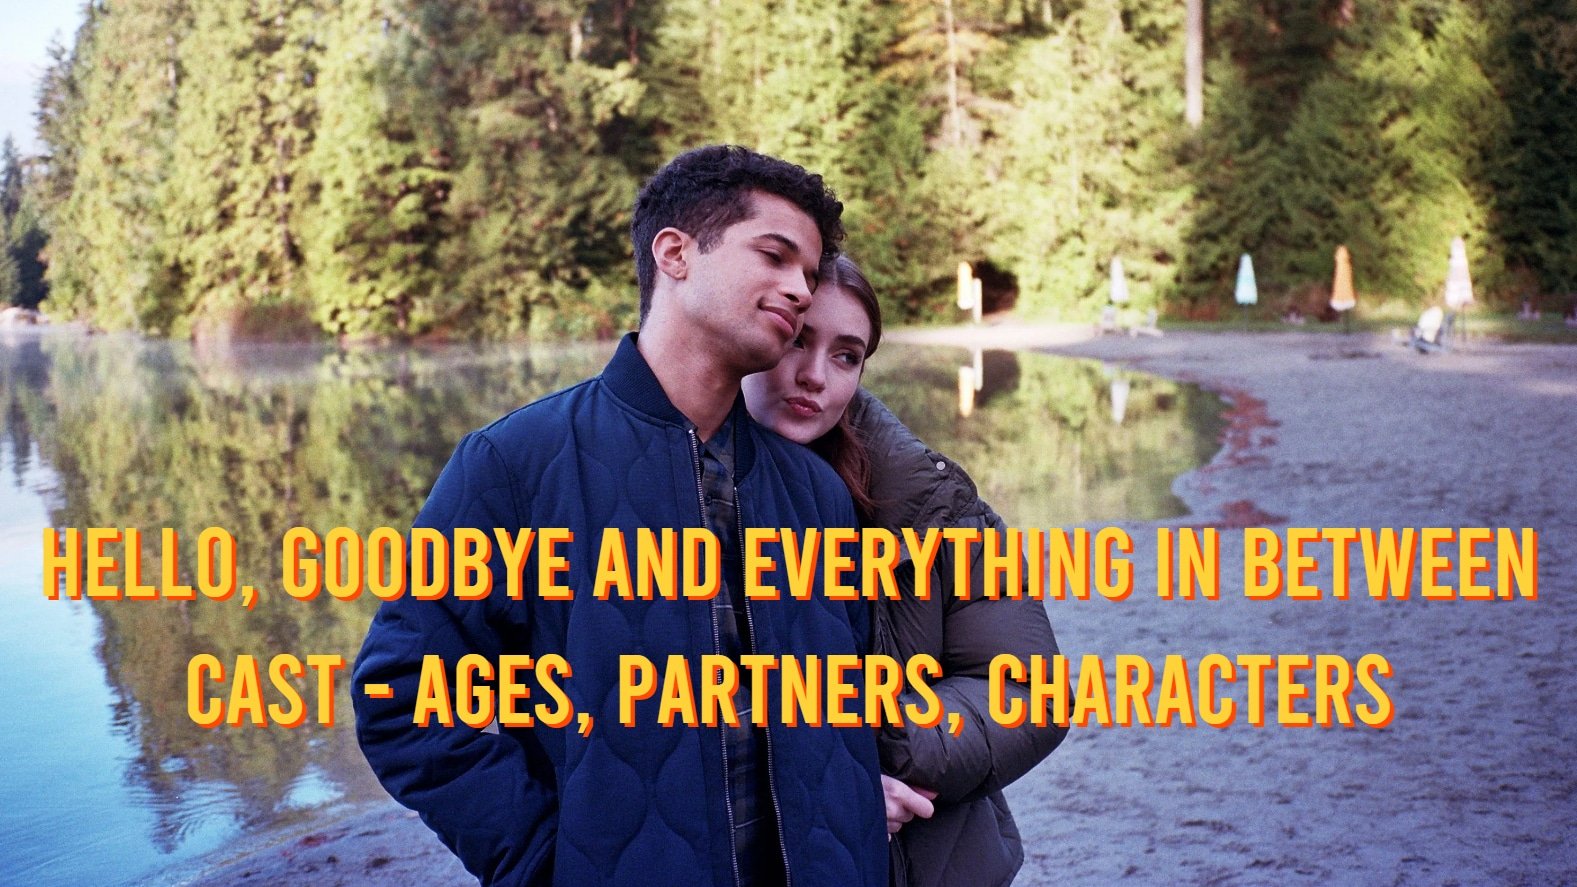 Hello Goodbye and Everything in Between Cast - Ages, Partners, Characters